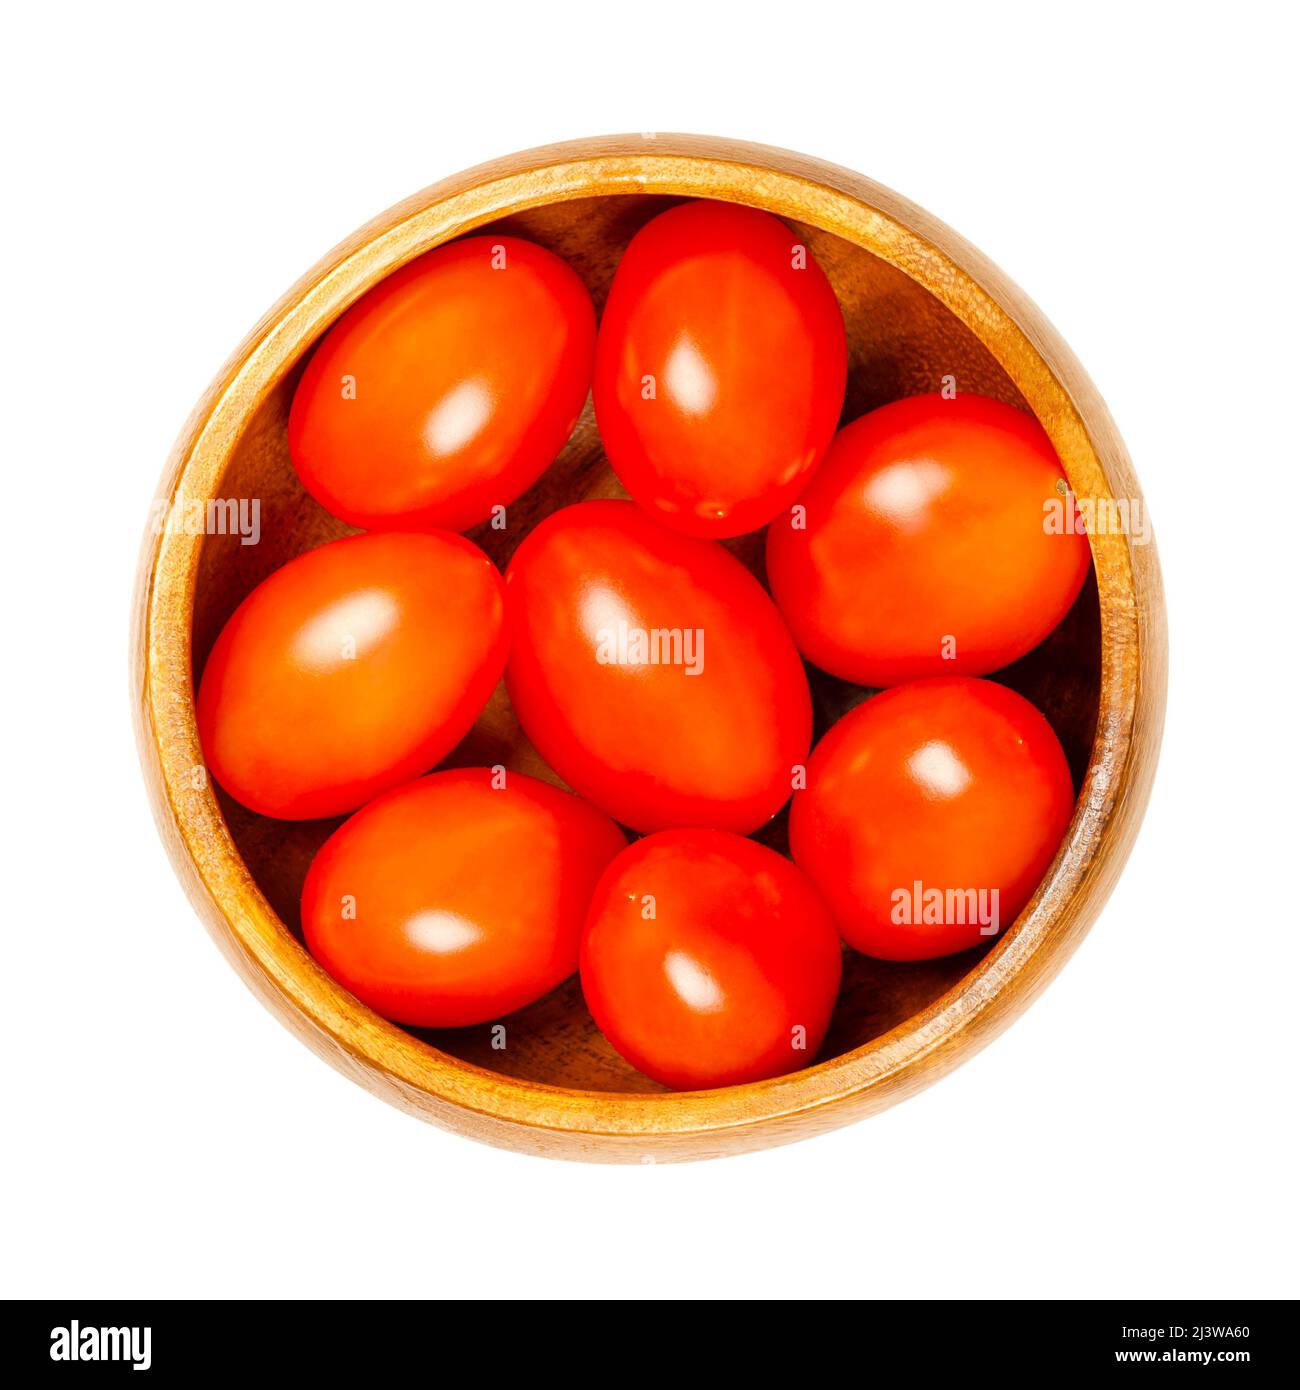 Red grape tomatoes, in a wooden bowl. Ripe, small, oblong cocktail tomatoes in the size of a thumb tip, shaped like a plum tomato, with sweet taste. Stock Photo